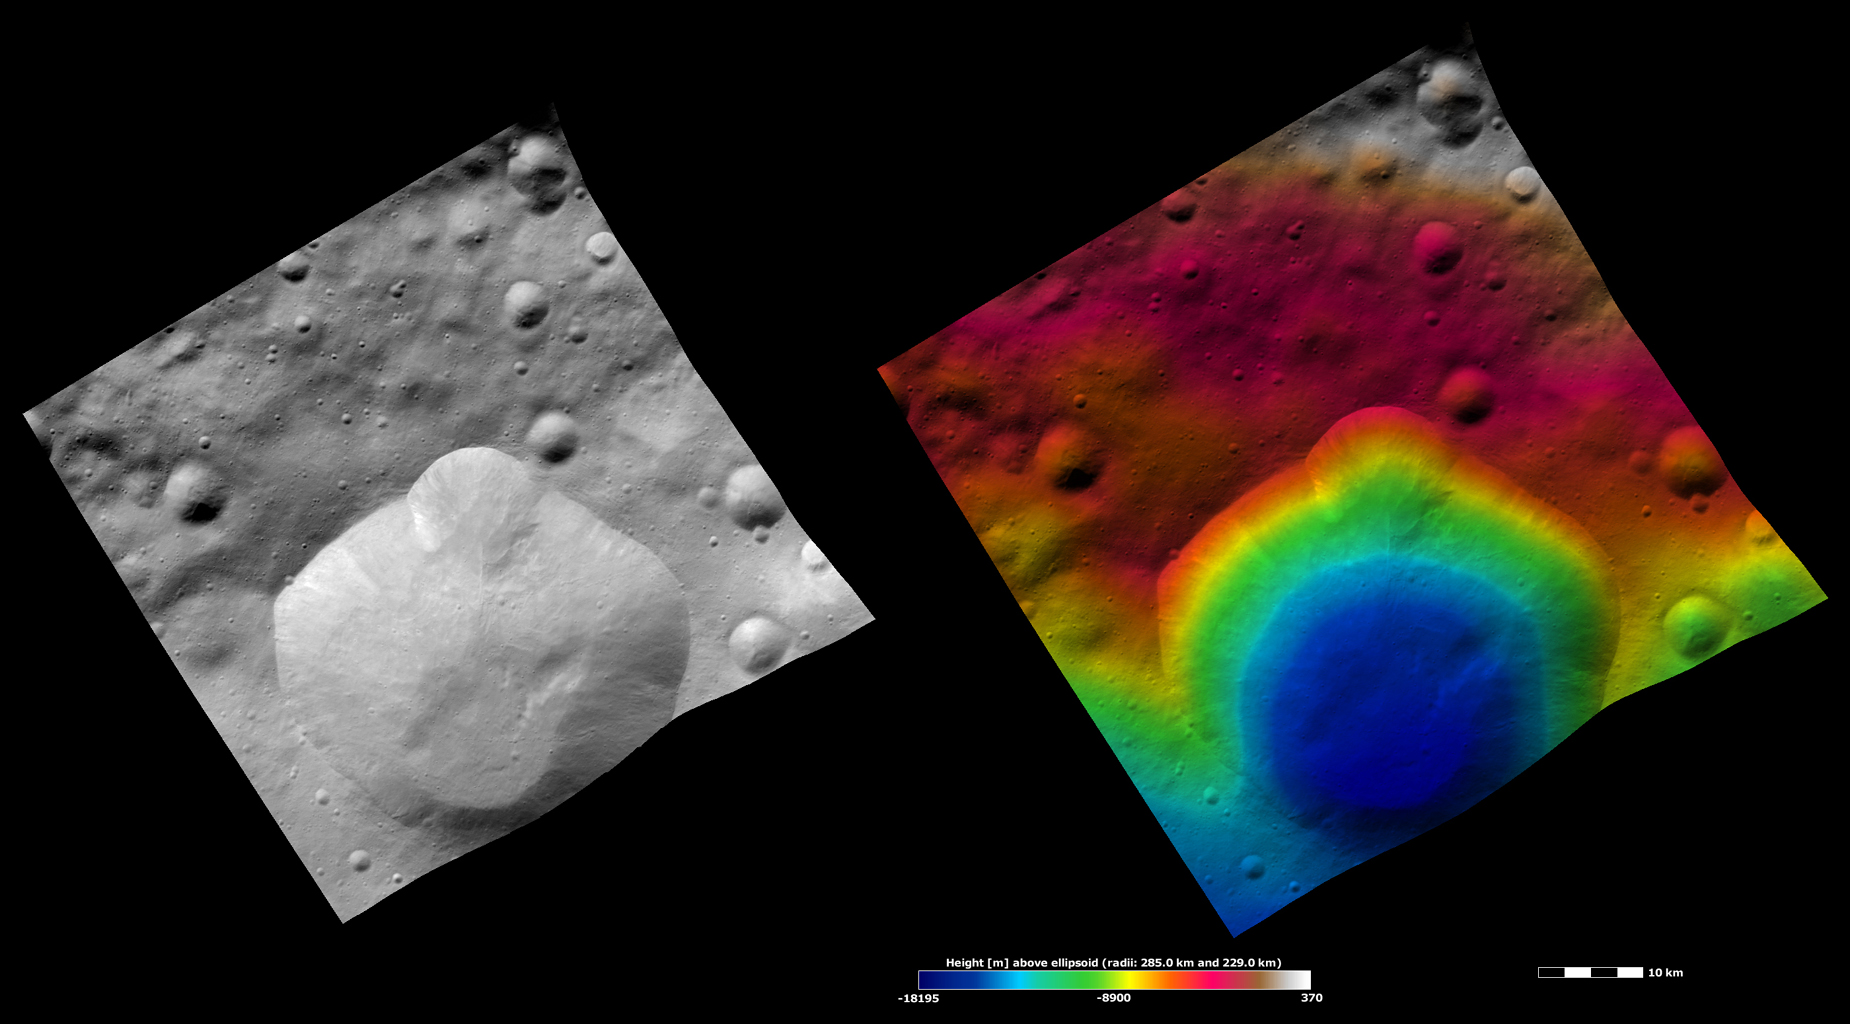 Lepida Crater, Apparent Brightness and Topography Images